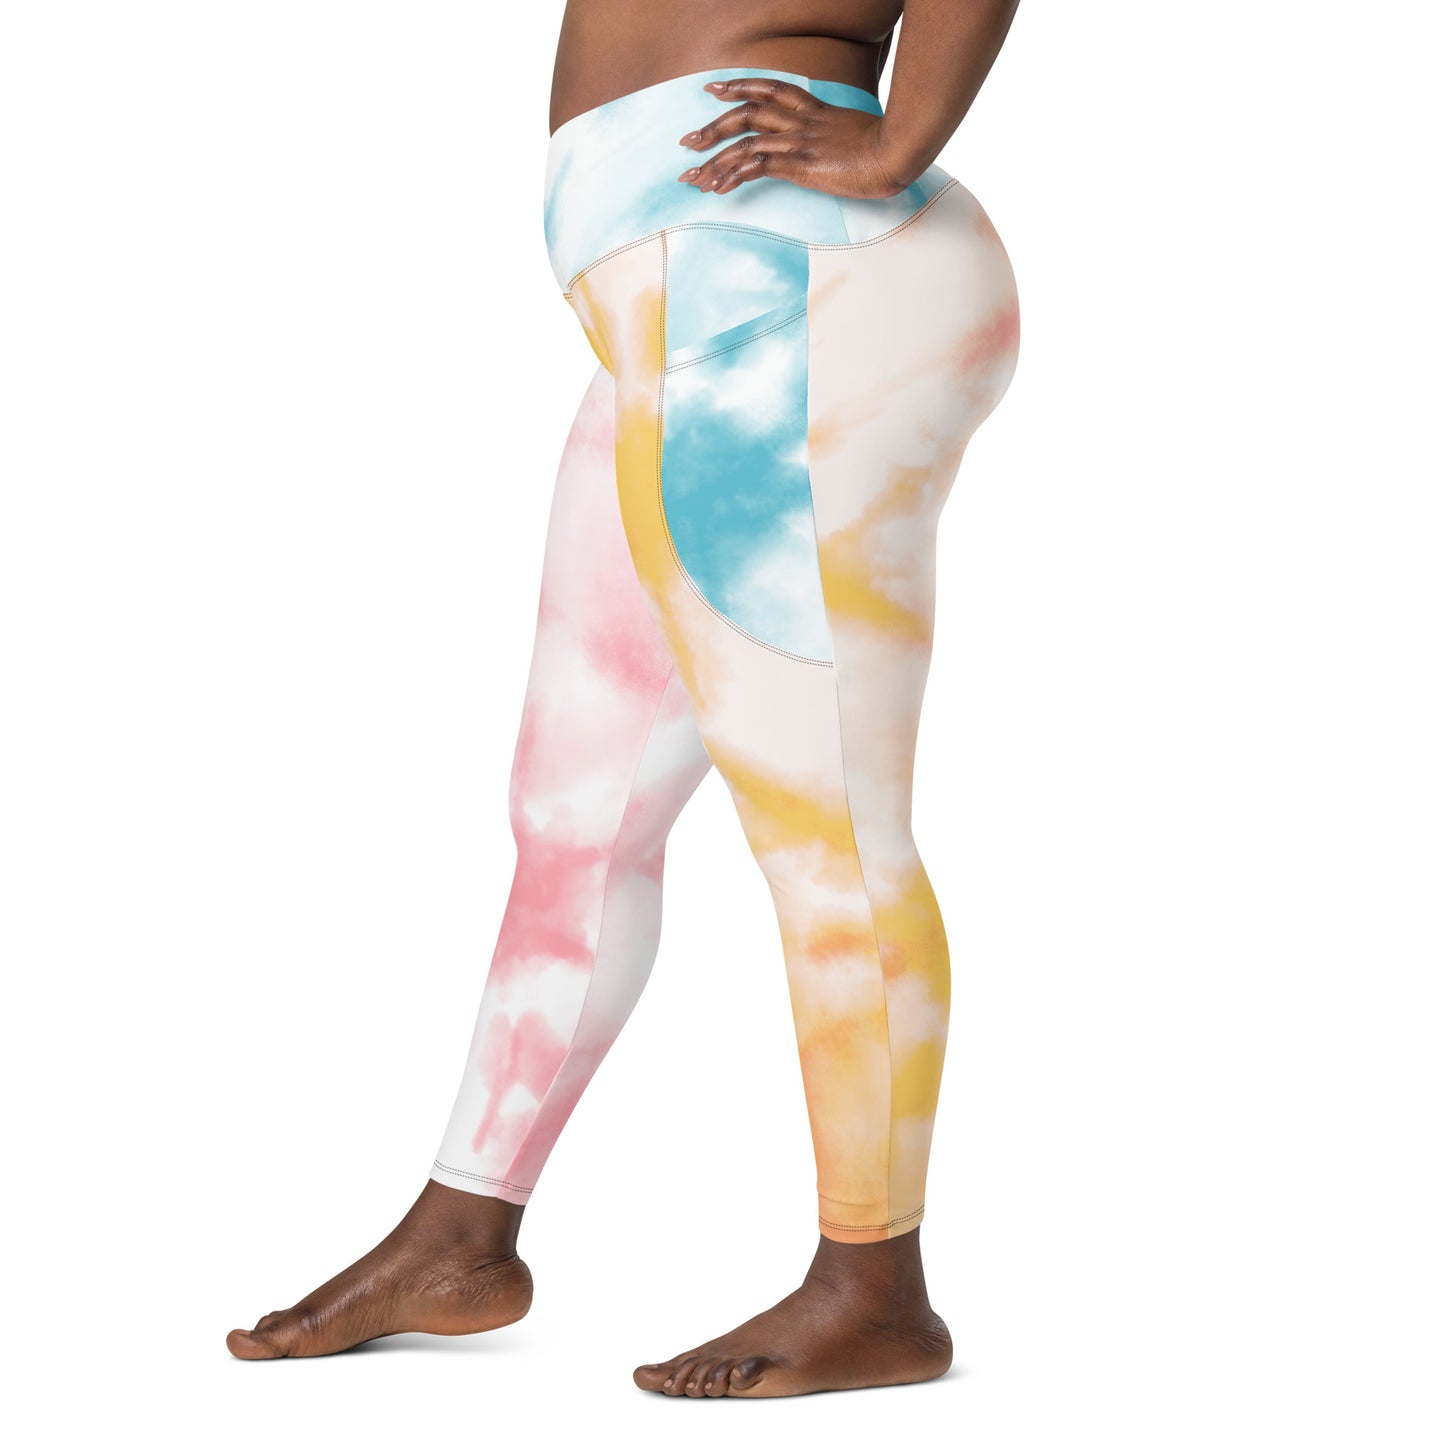 Tie and Dye High-waist Crossover leggings with pockets - Blue and Yellow